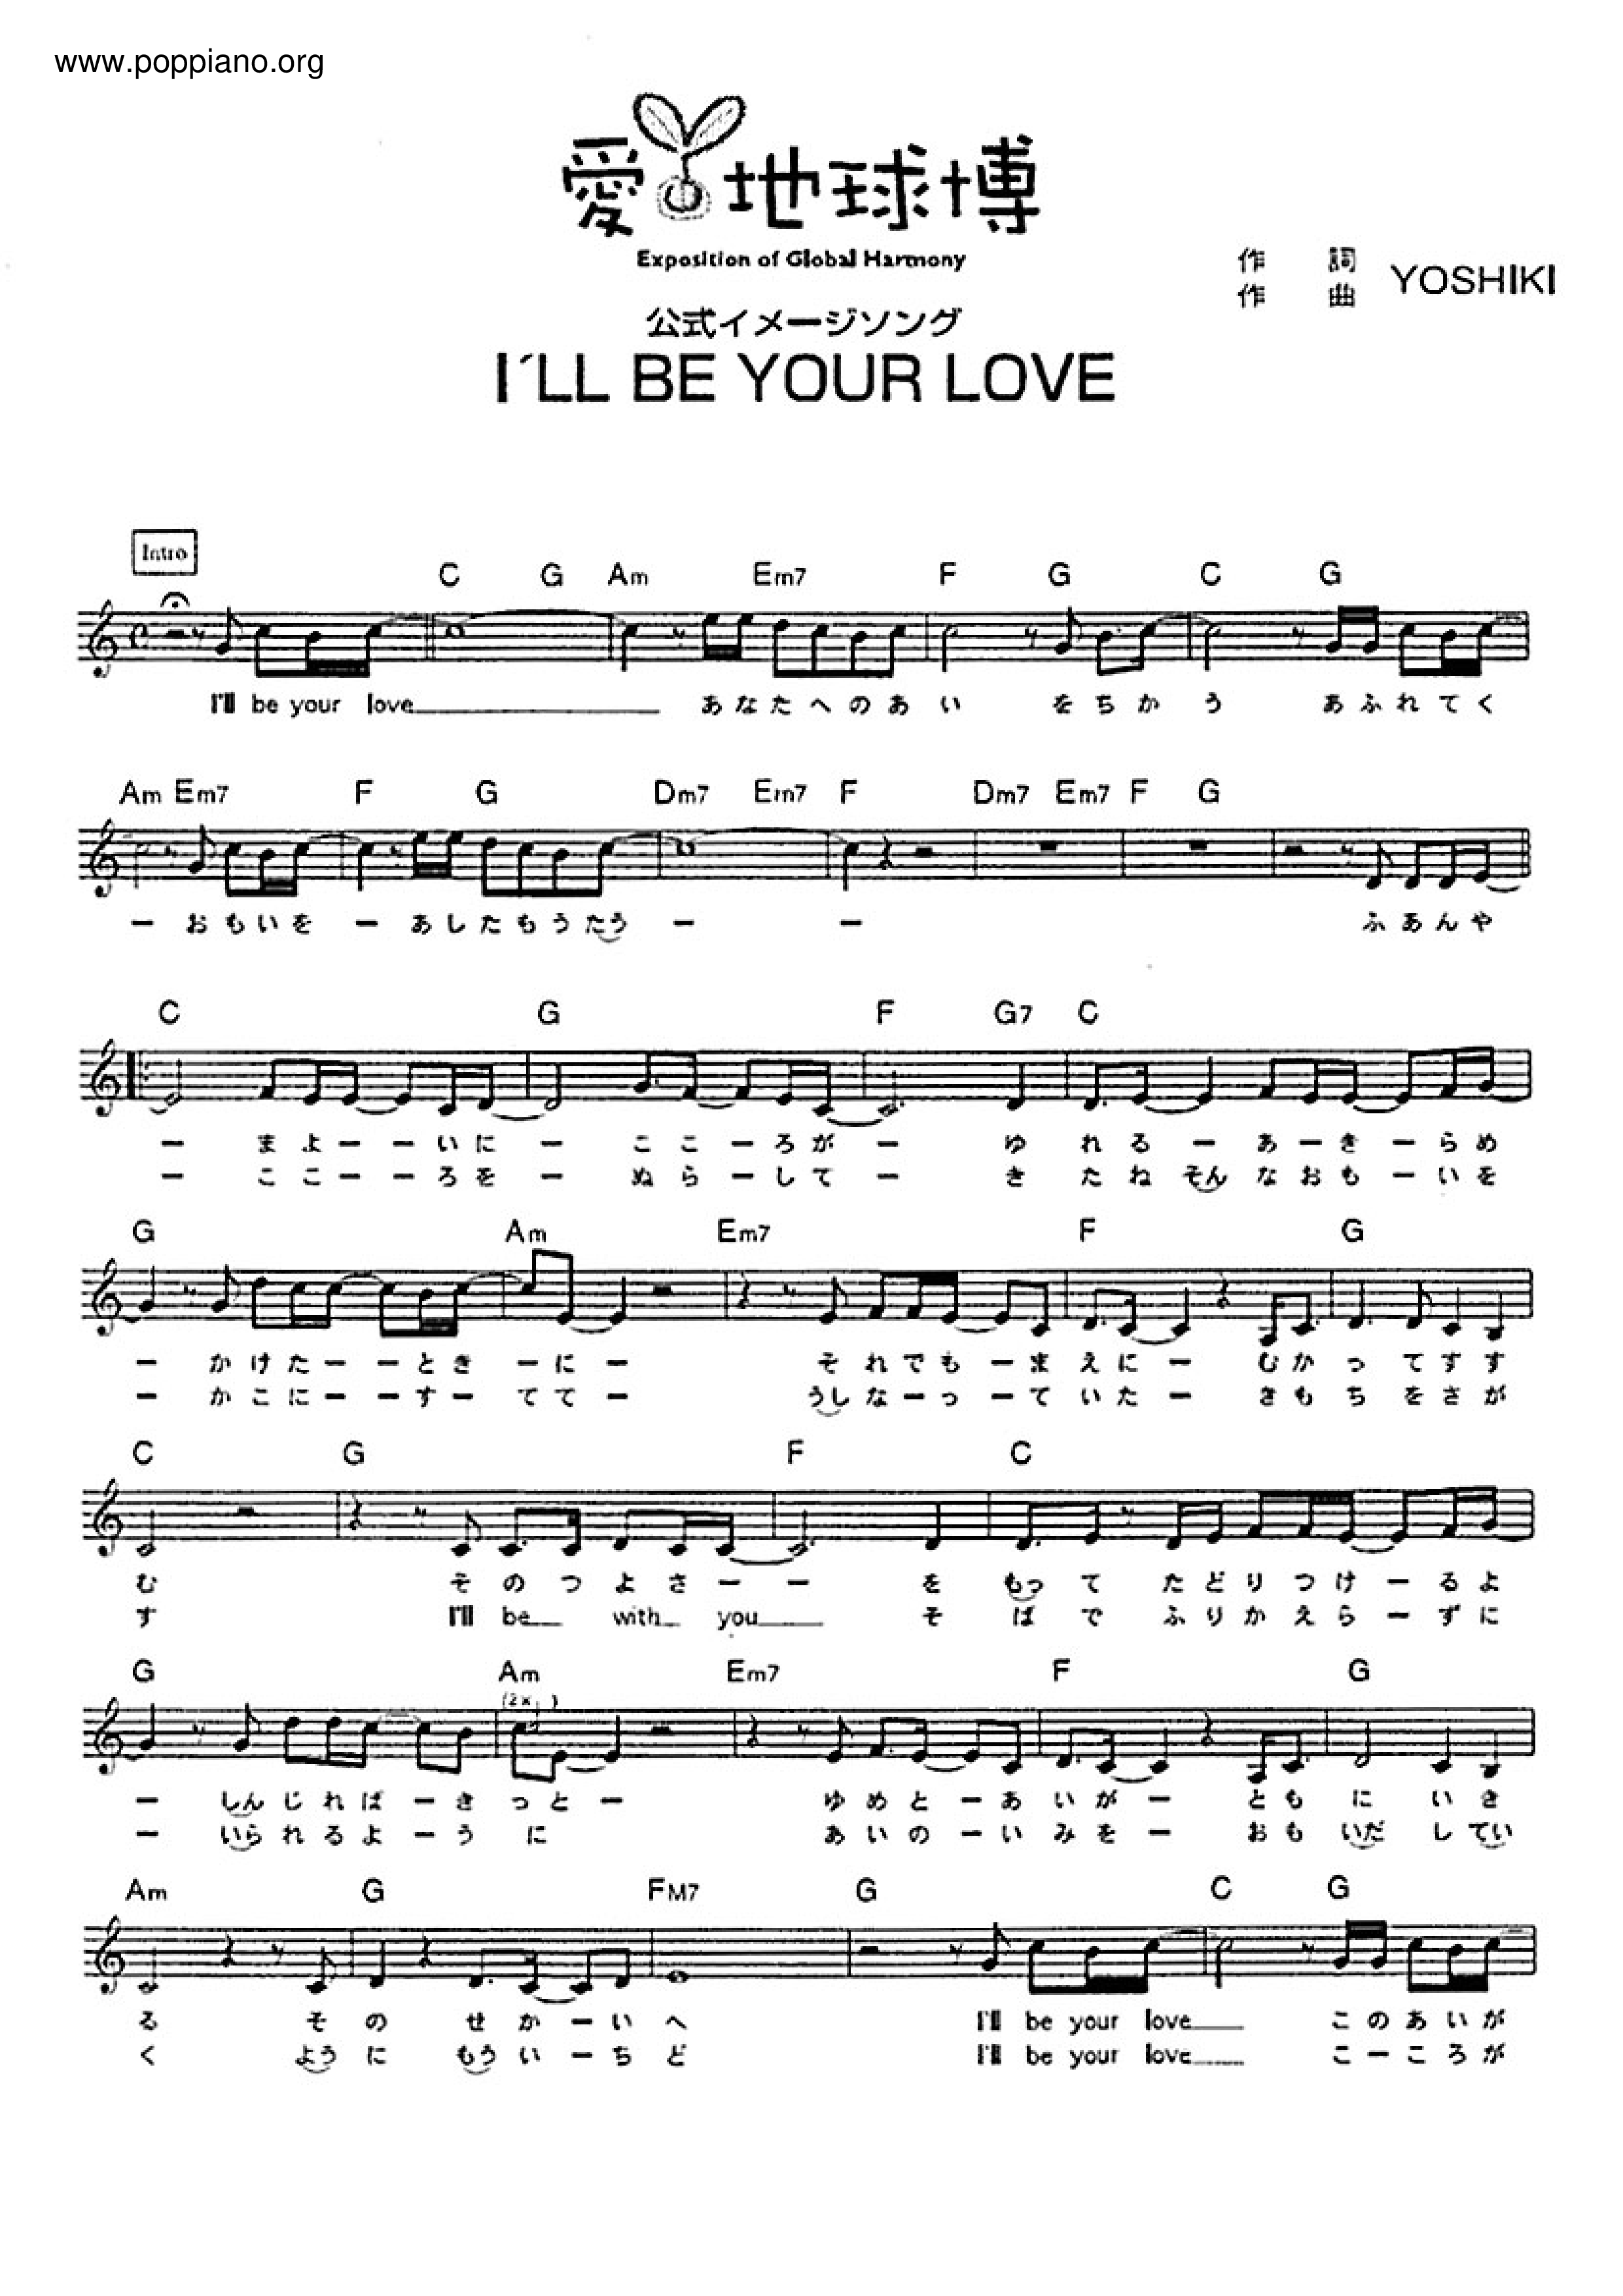 I'll Be Your Love Score